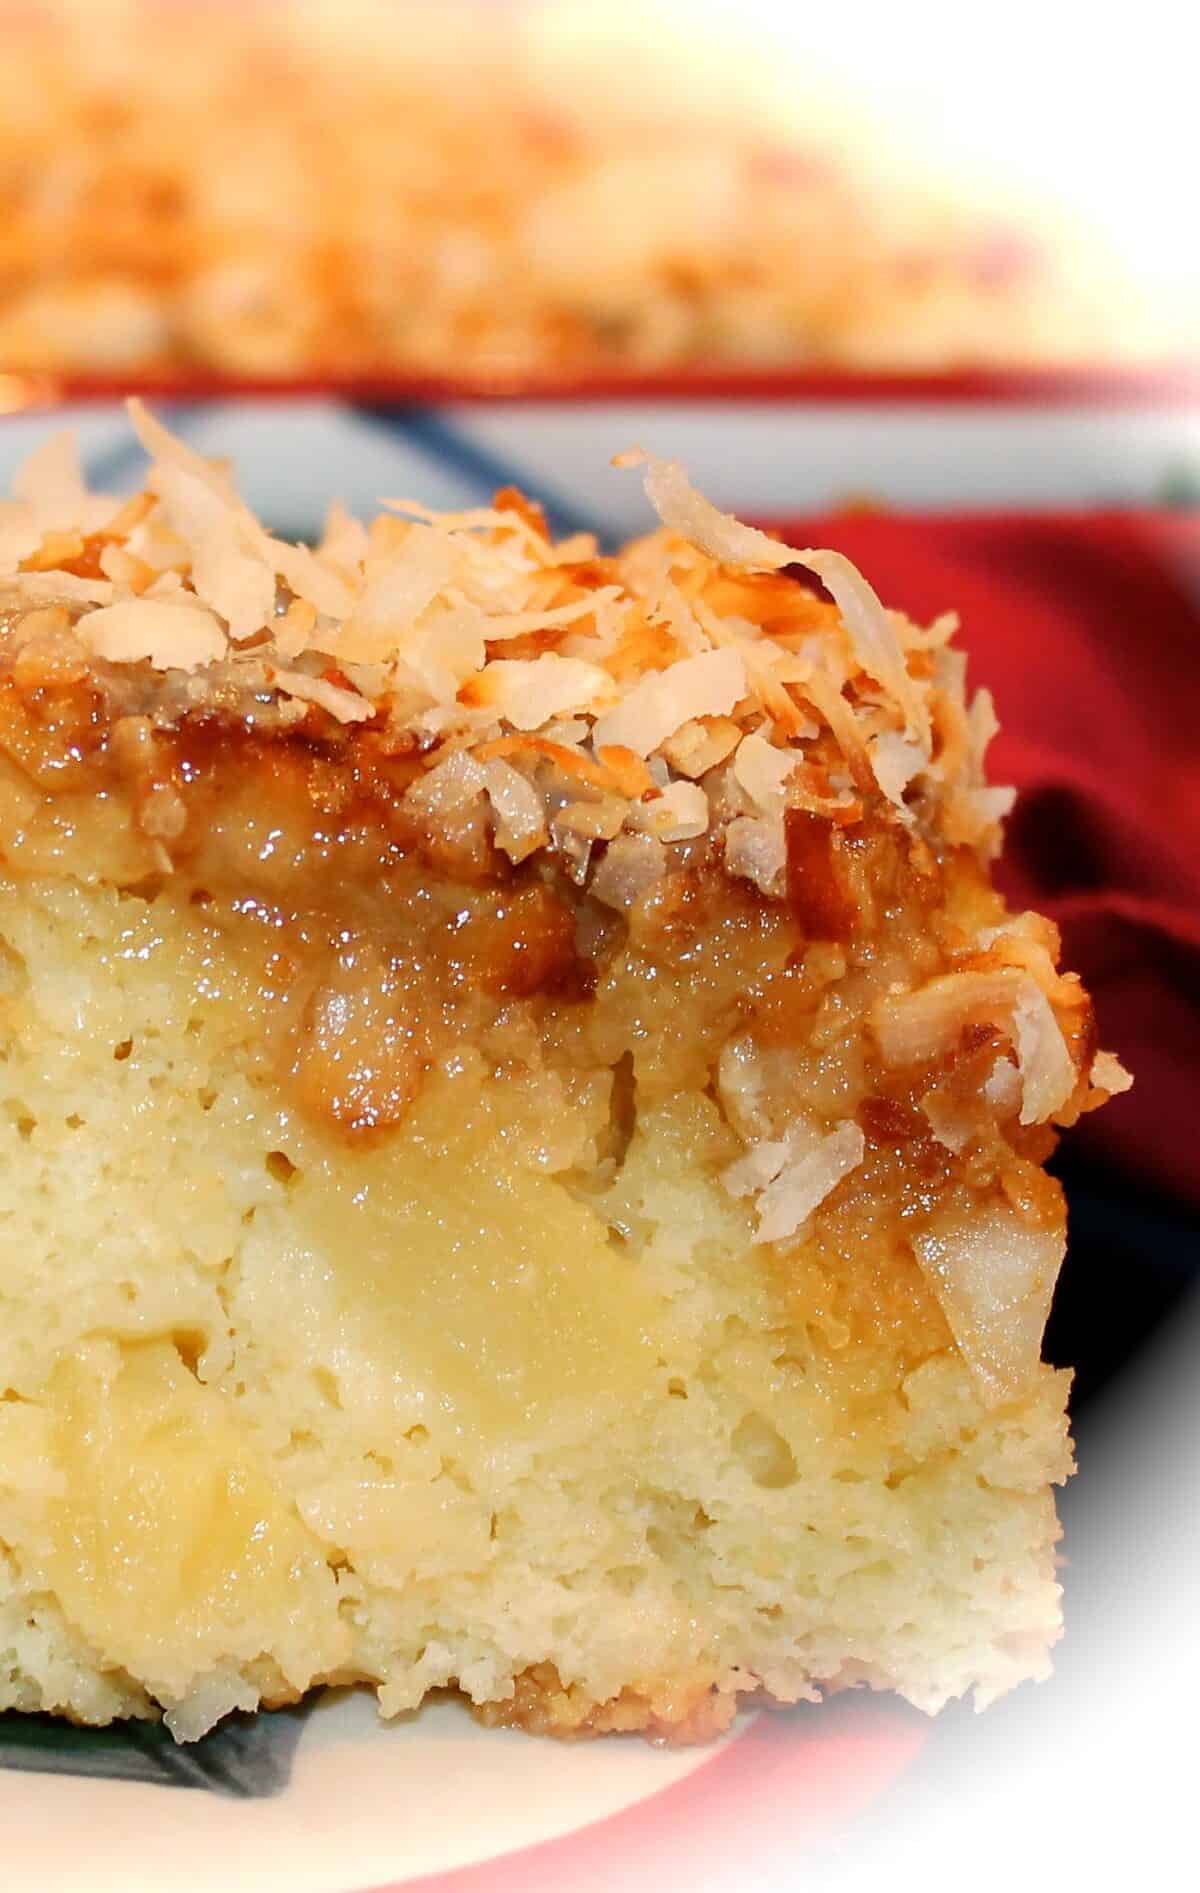  Vanilla, caramel, and pecan flavors blend perfectly in this cake.